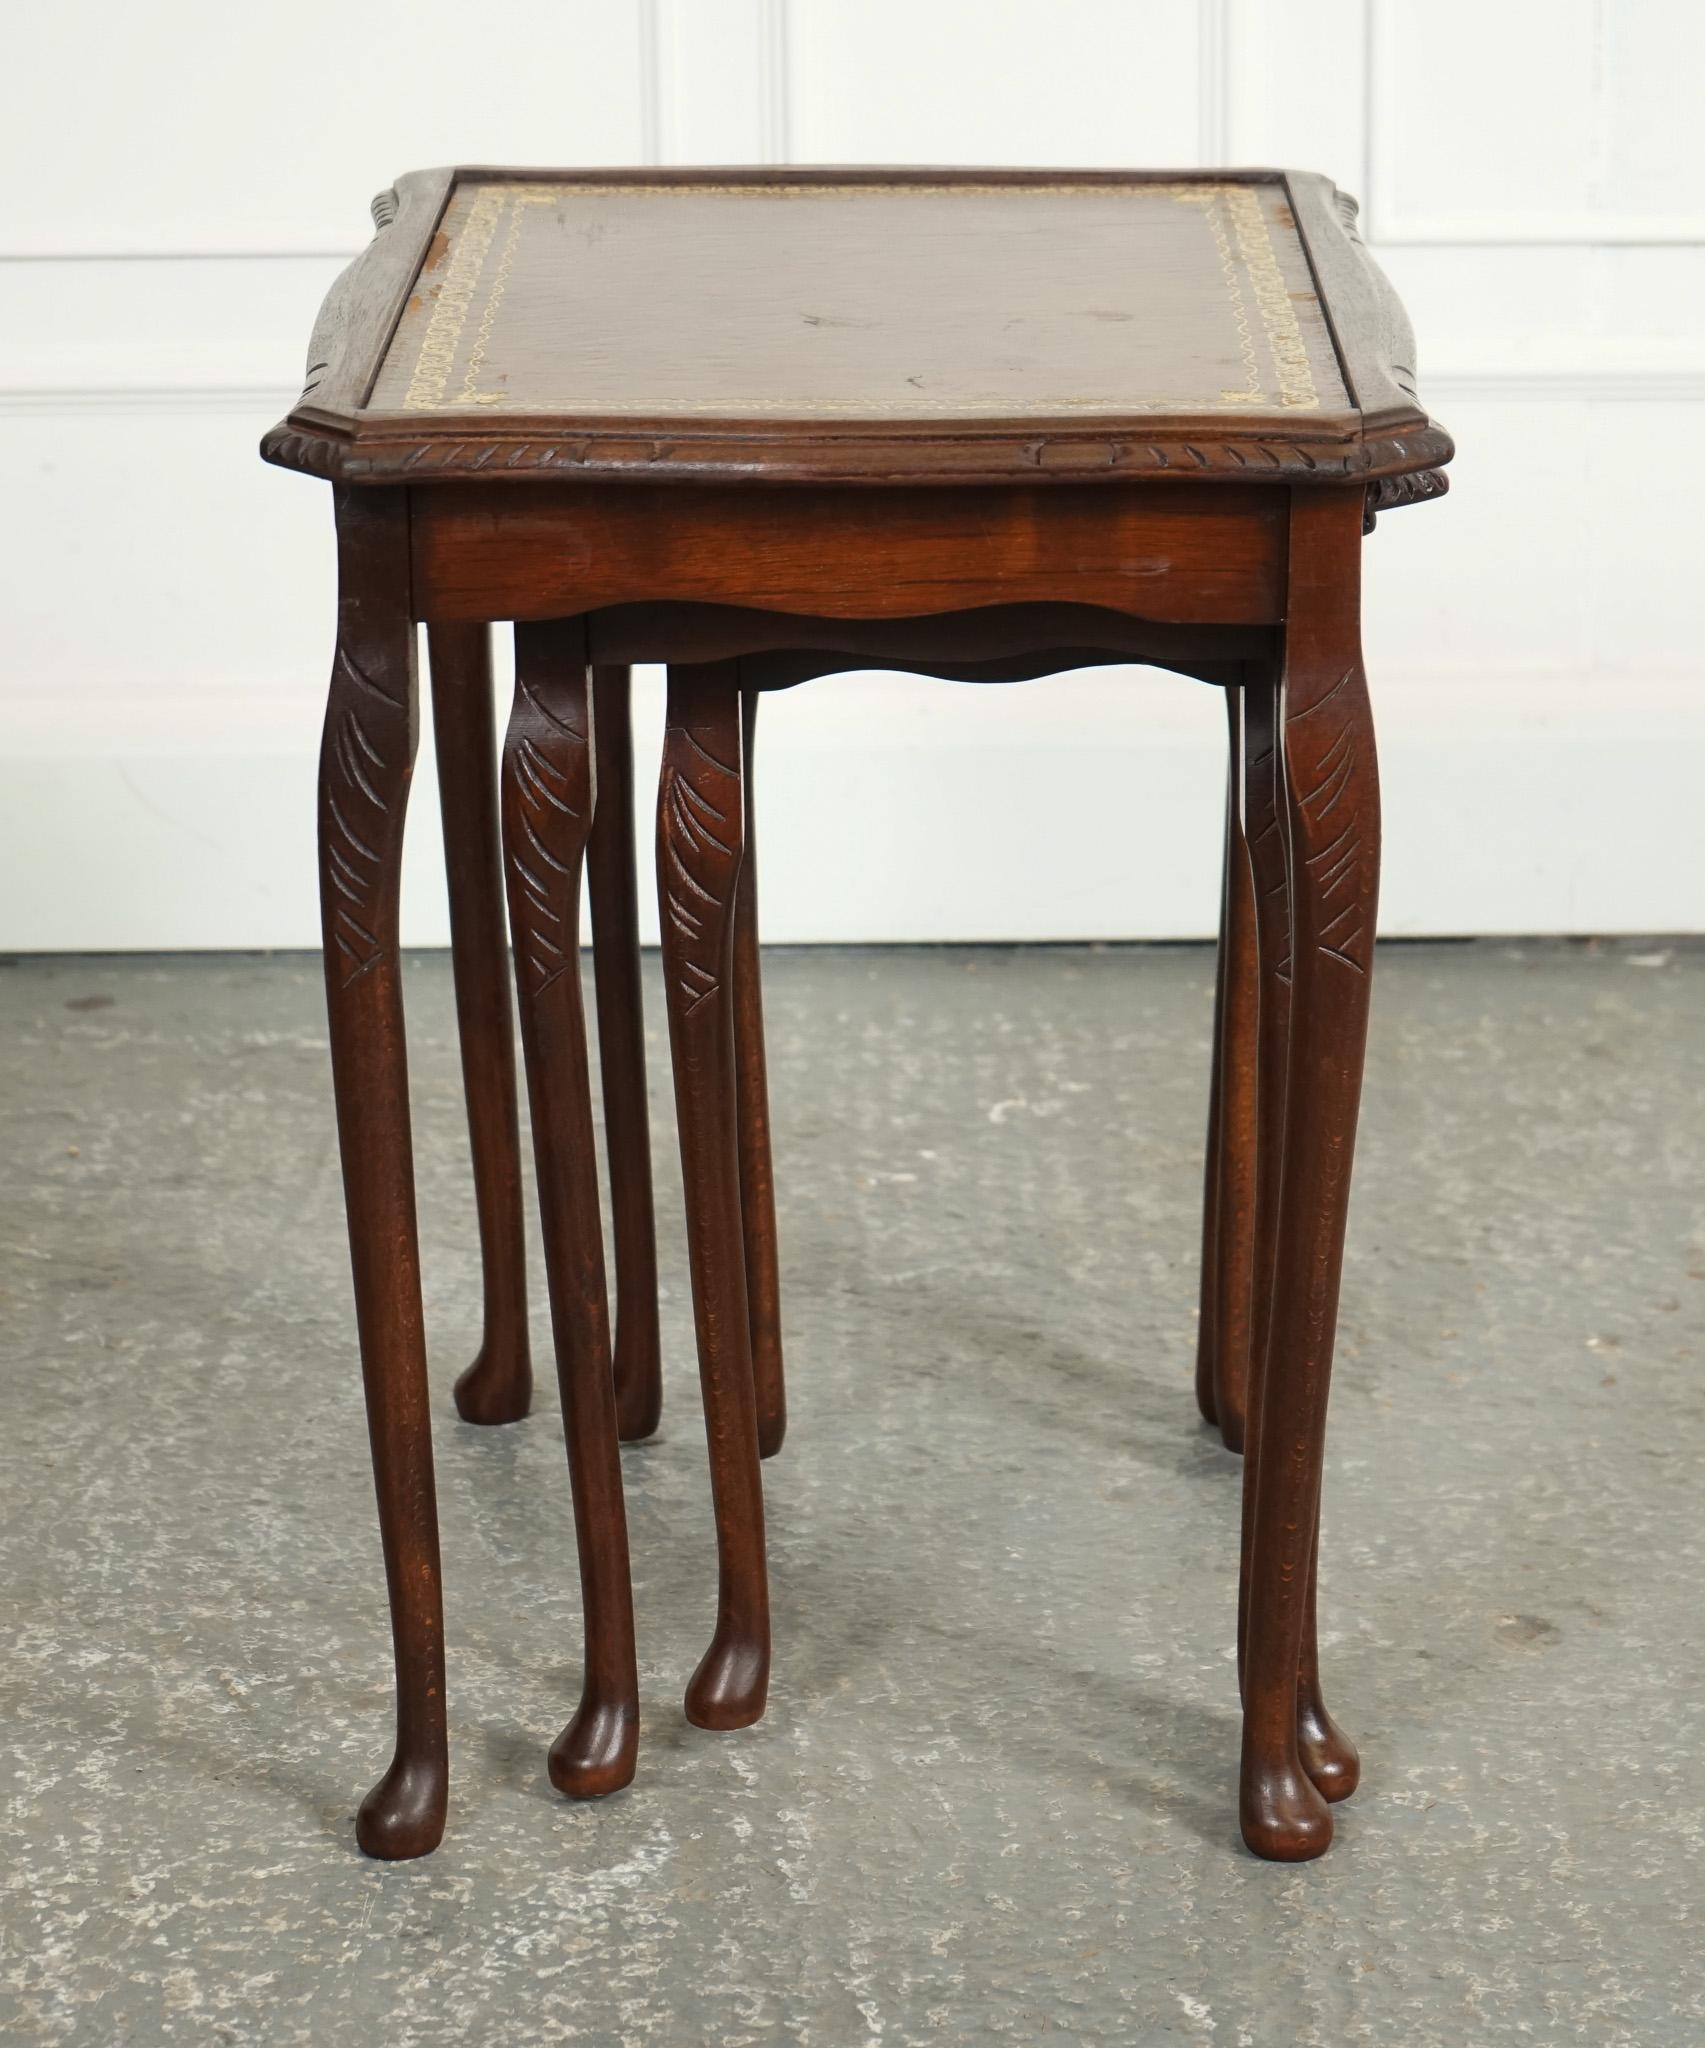 VINTAGE NEST OF TABLES QUEEN ANNE STYLE LEGS WiTH BROWN EMBOSSED LEATHER TOP In Good Condition For Sale In Pulborough, GB